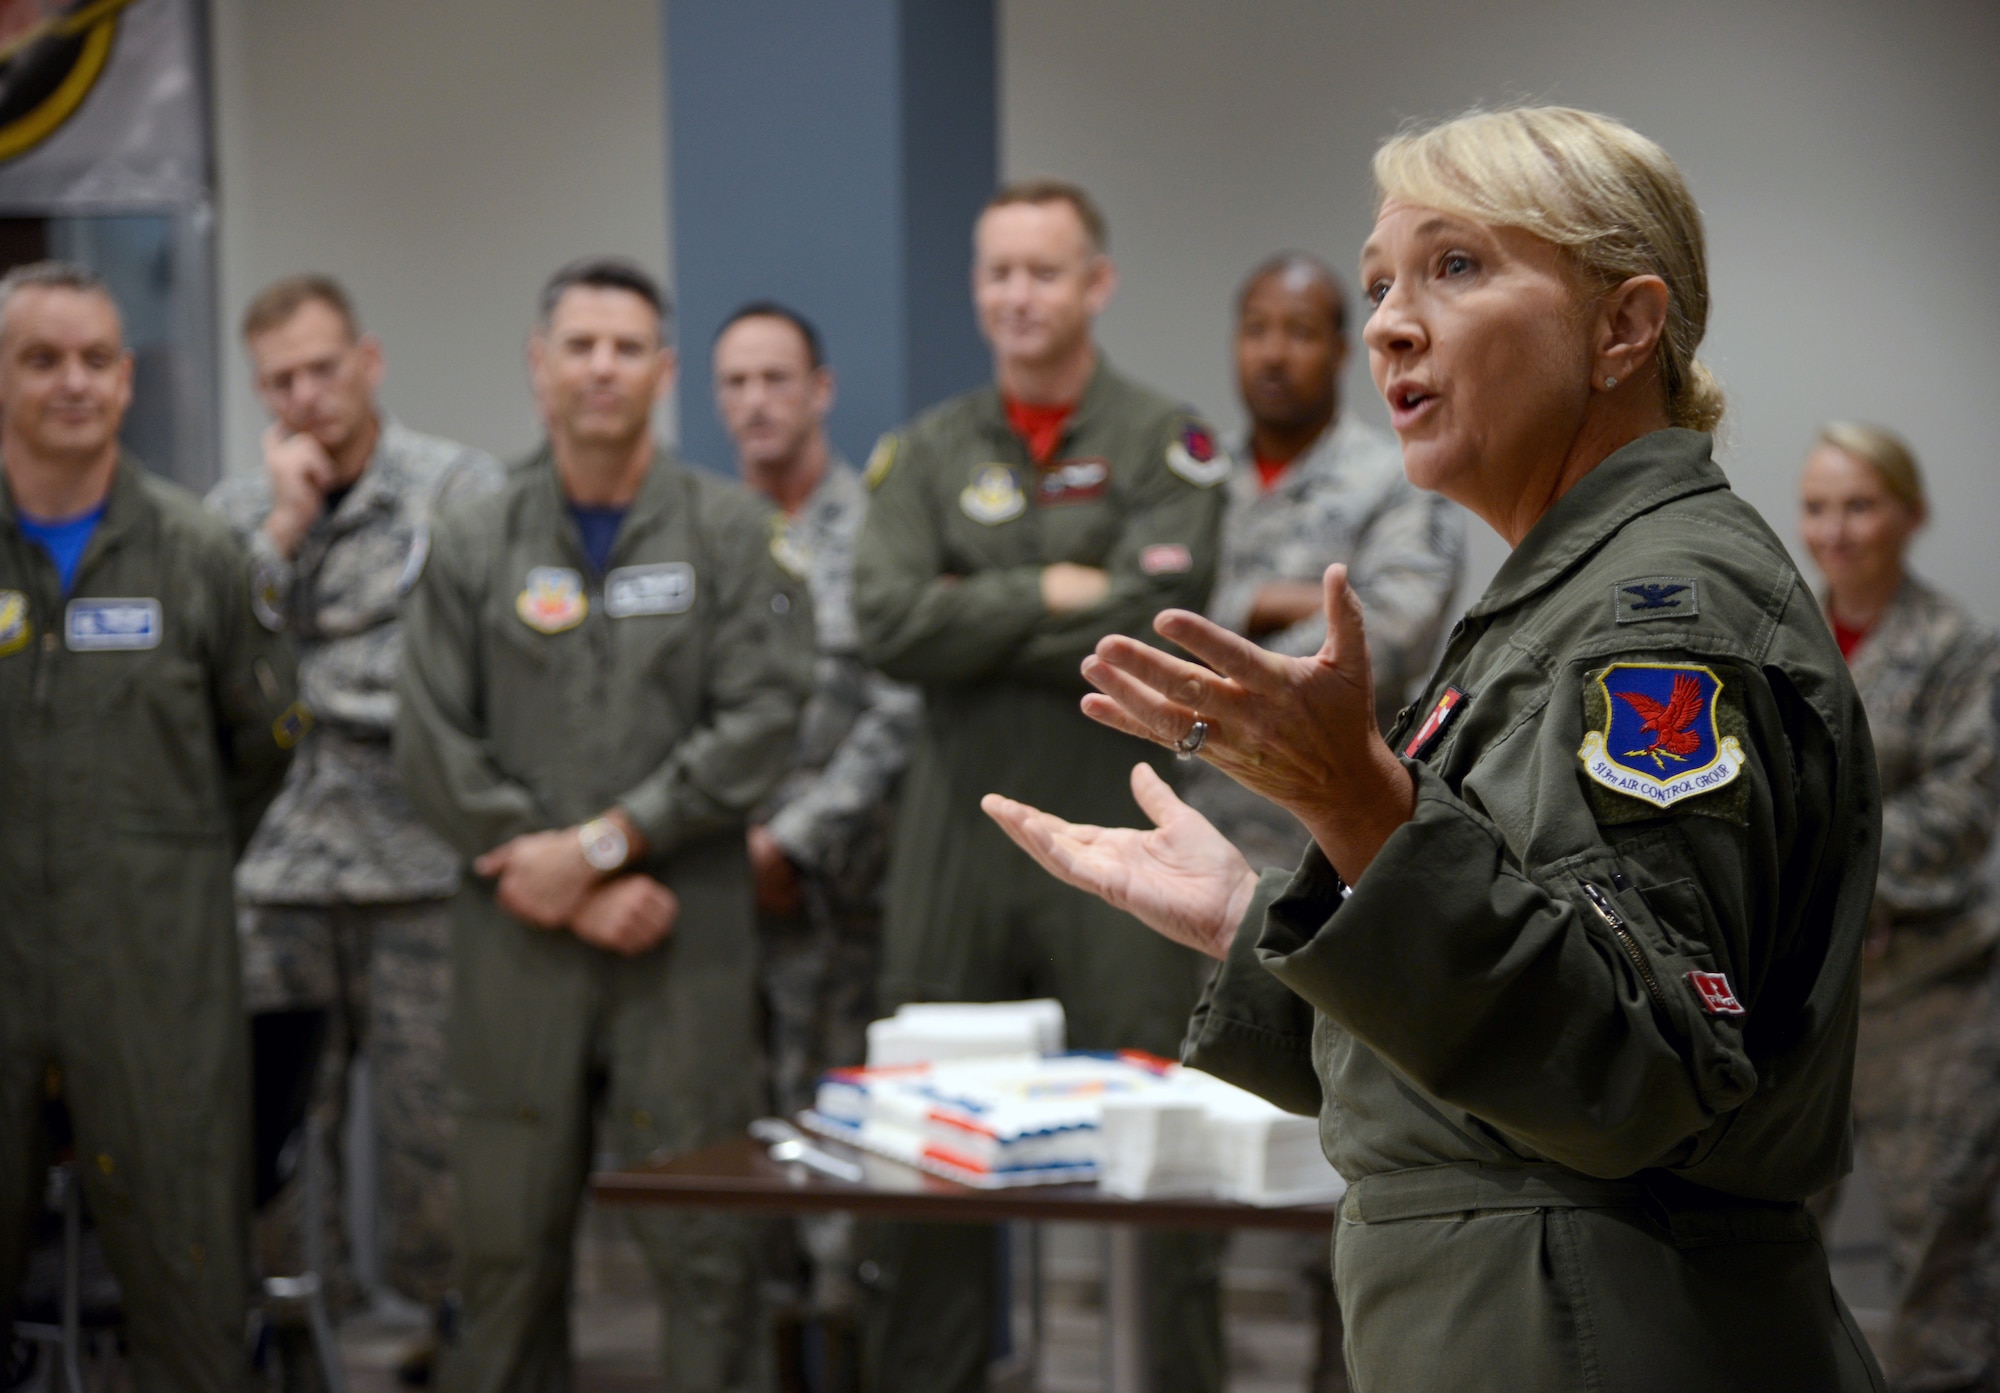 "Good things come to those who work hard for it," quoted Col. Laurie Dickson, commander of the 513th Air Control Group, as she welcomed guests to the ribbon cutting ceremony for Bldg. 461, the new home of the Thumpers.The 513th is a Reservist group which supports the 552nd Air Control Wing. The new 30,000 sq. ft. operations center will combine the 513ACG, the 513th Operations Support Flight (513OSS) and the 970th Airborne Air Control Squadron, after 20 years of being geographically separated on base.